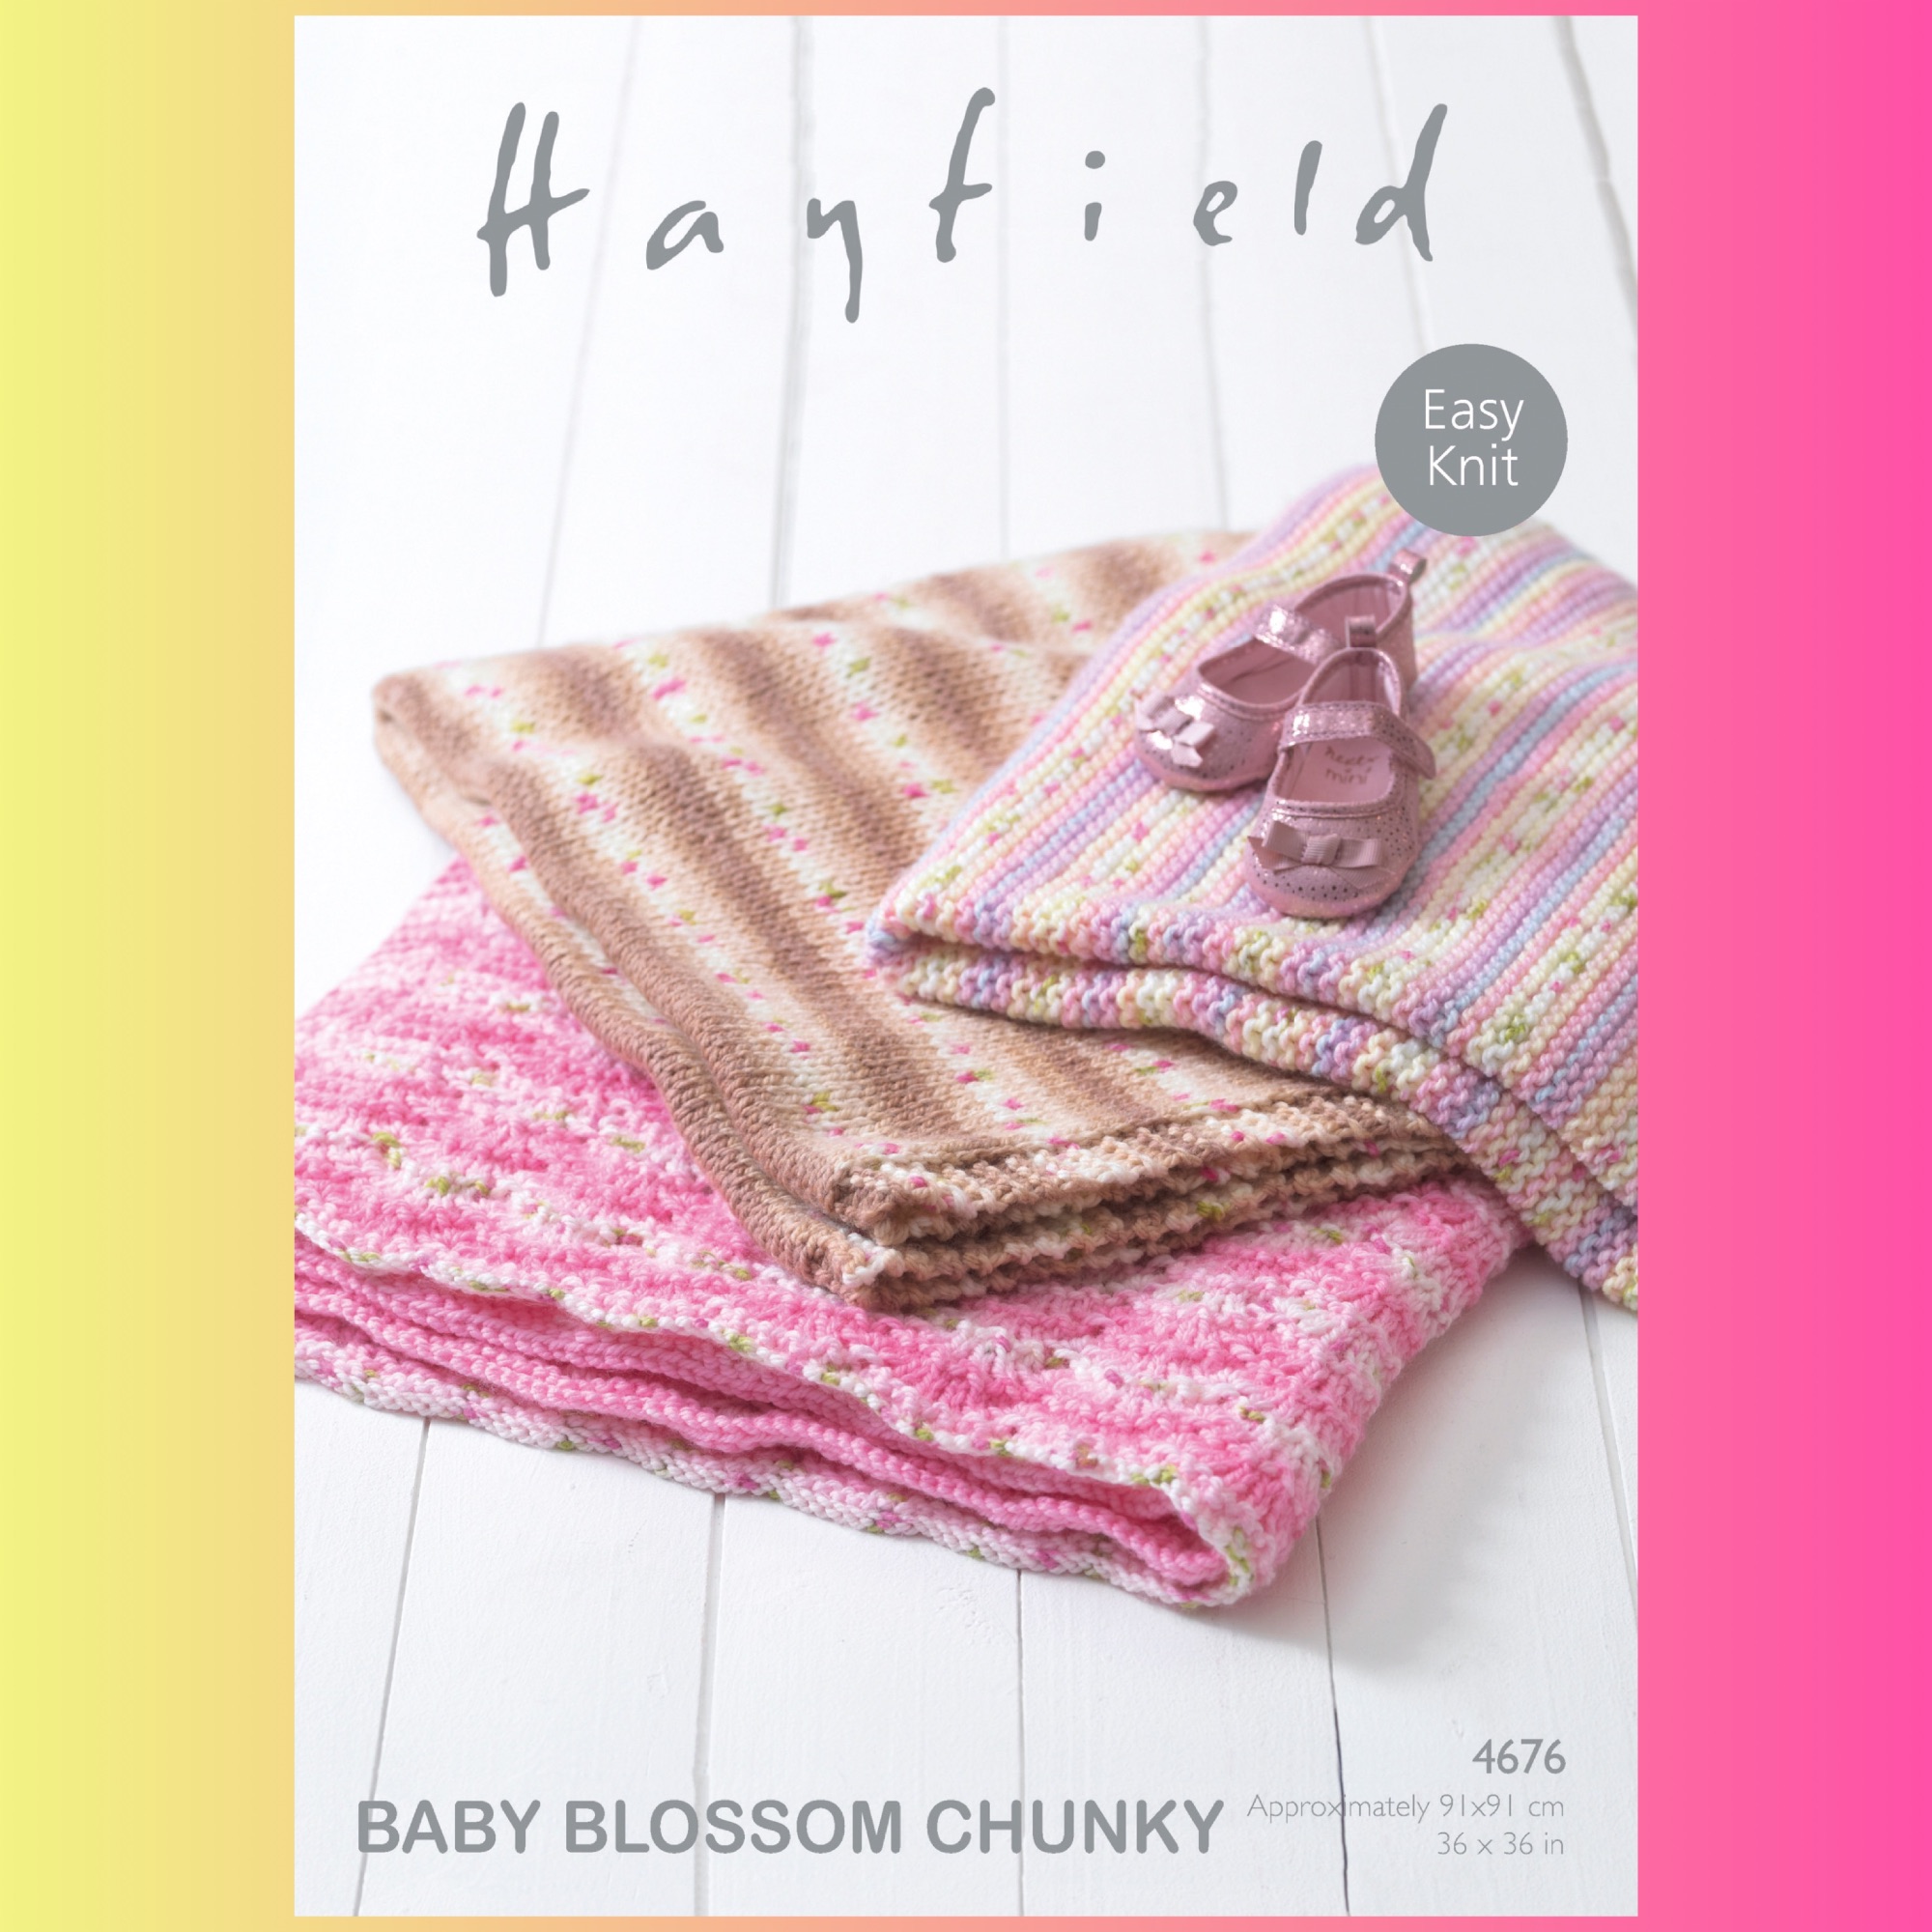 Hayfield baby blossom chunky knitting pattern 4676 Baby blankets